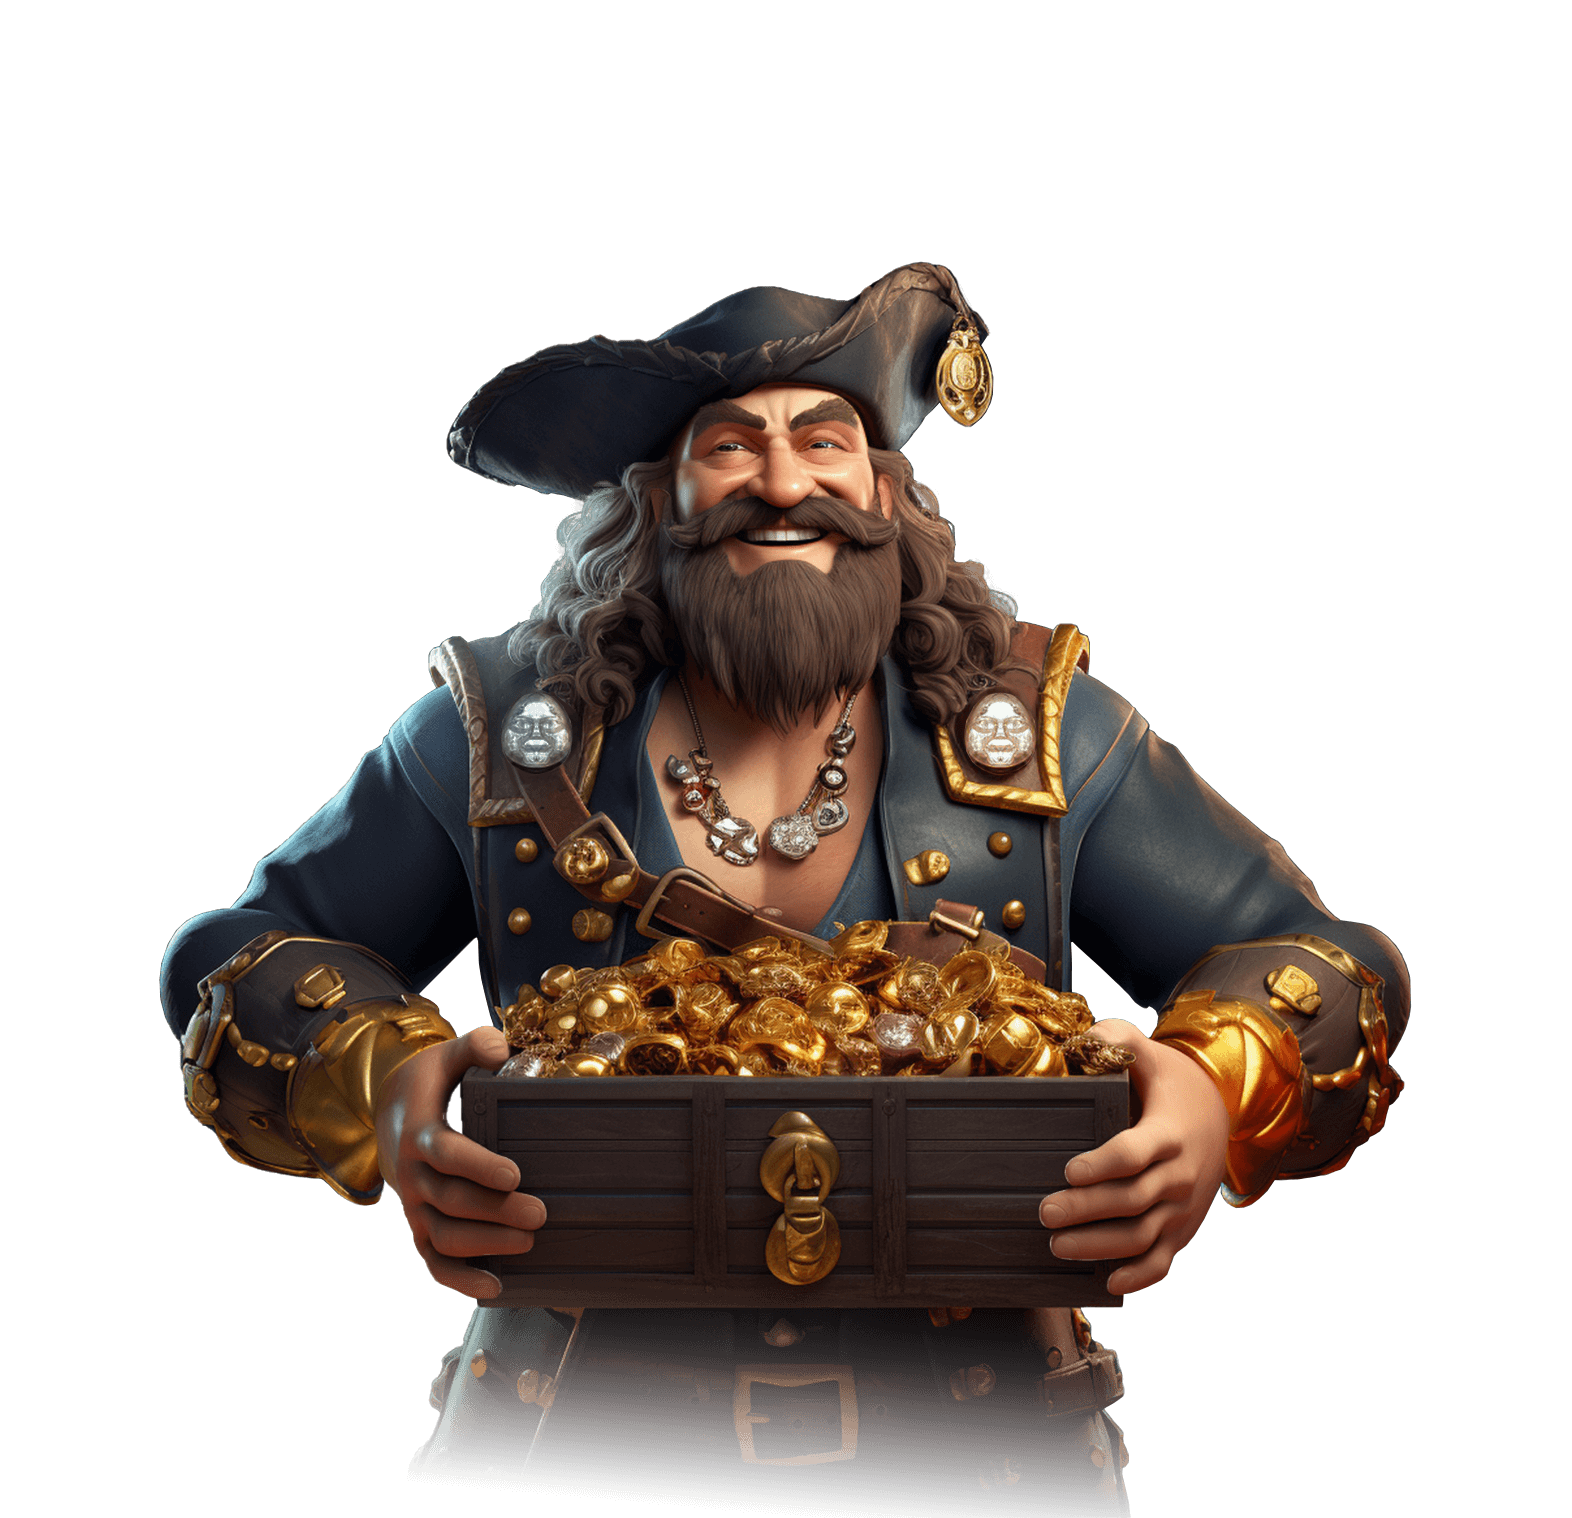 Pirate Captain holding a chest